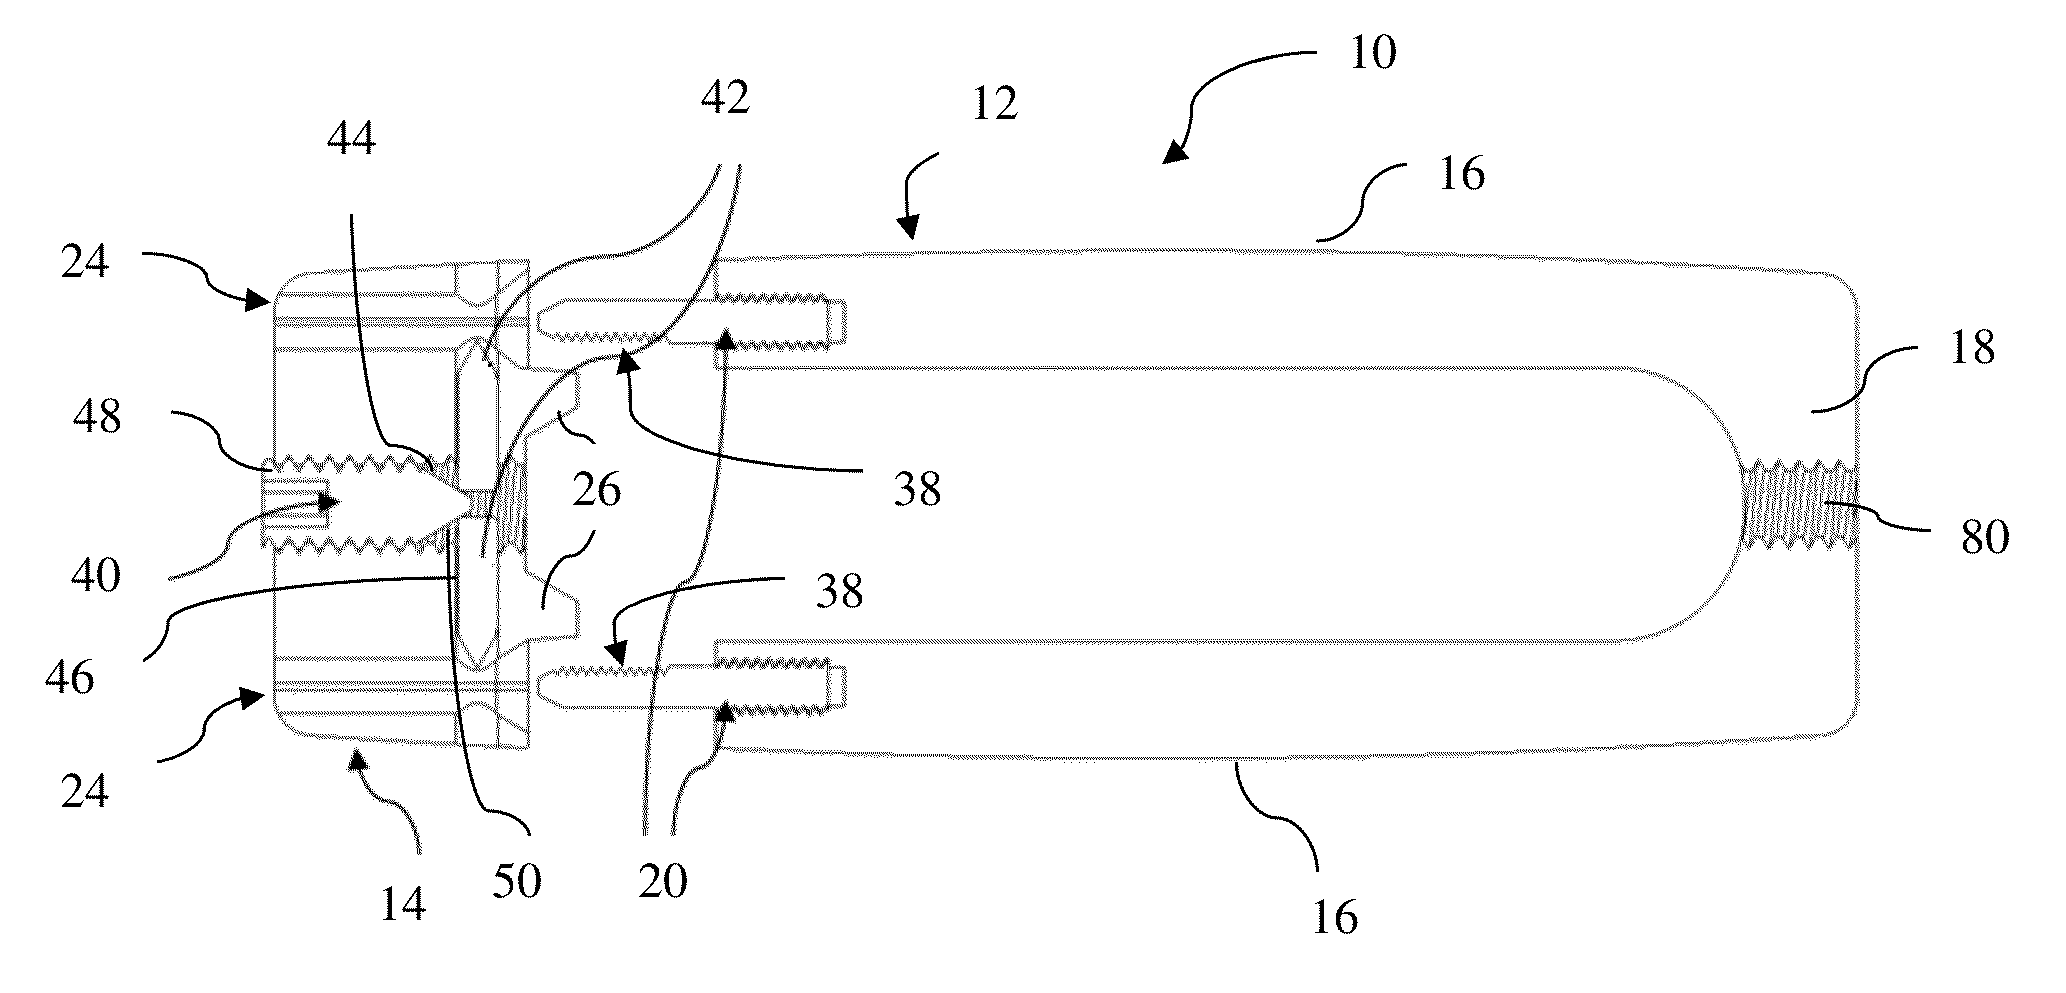 Interbody fusion implant and related methods